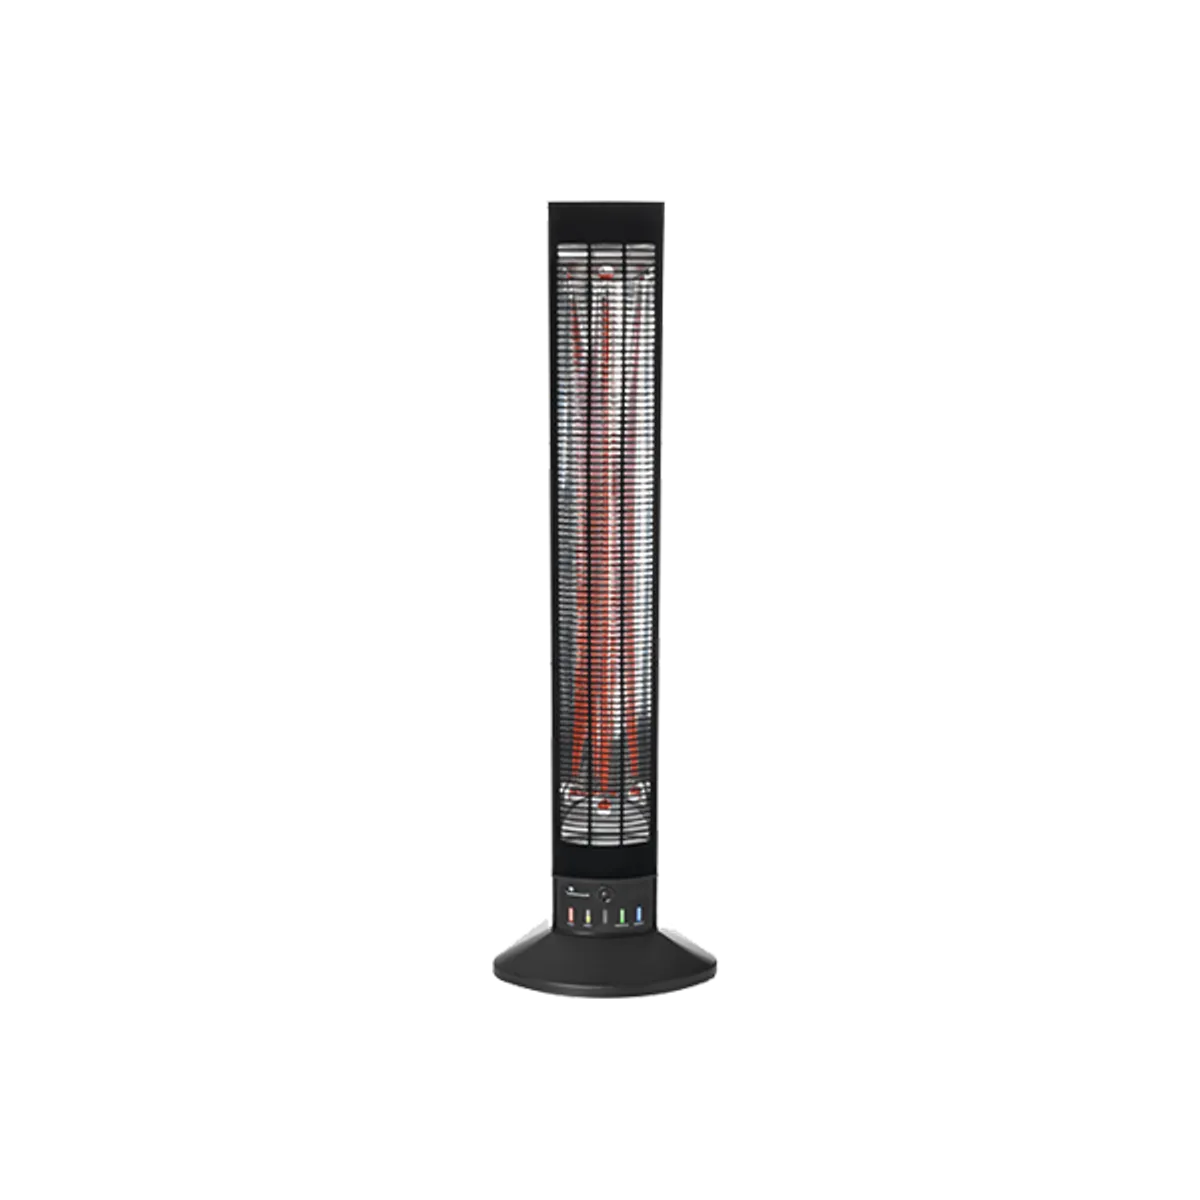 Meri Infrared floor standing heater Inside Out Contracts